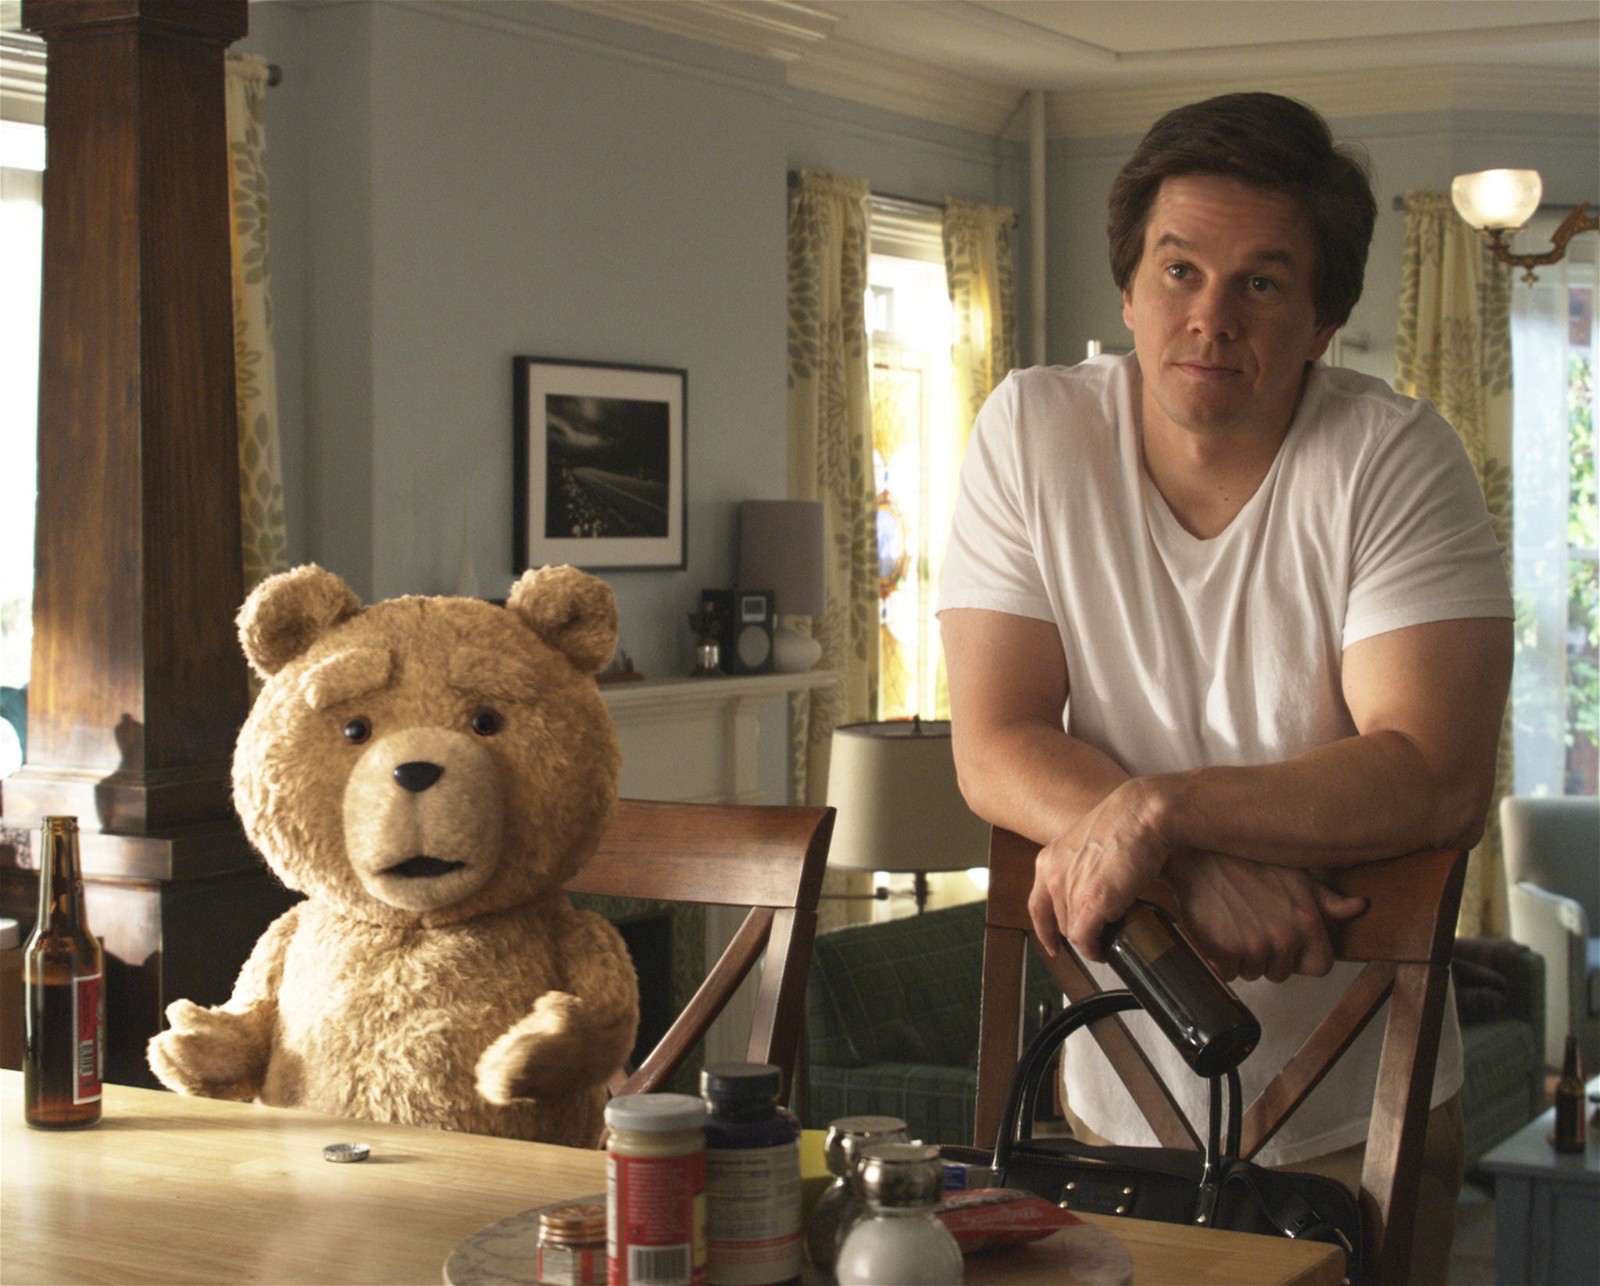 Mark Wahlberg in Ted